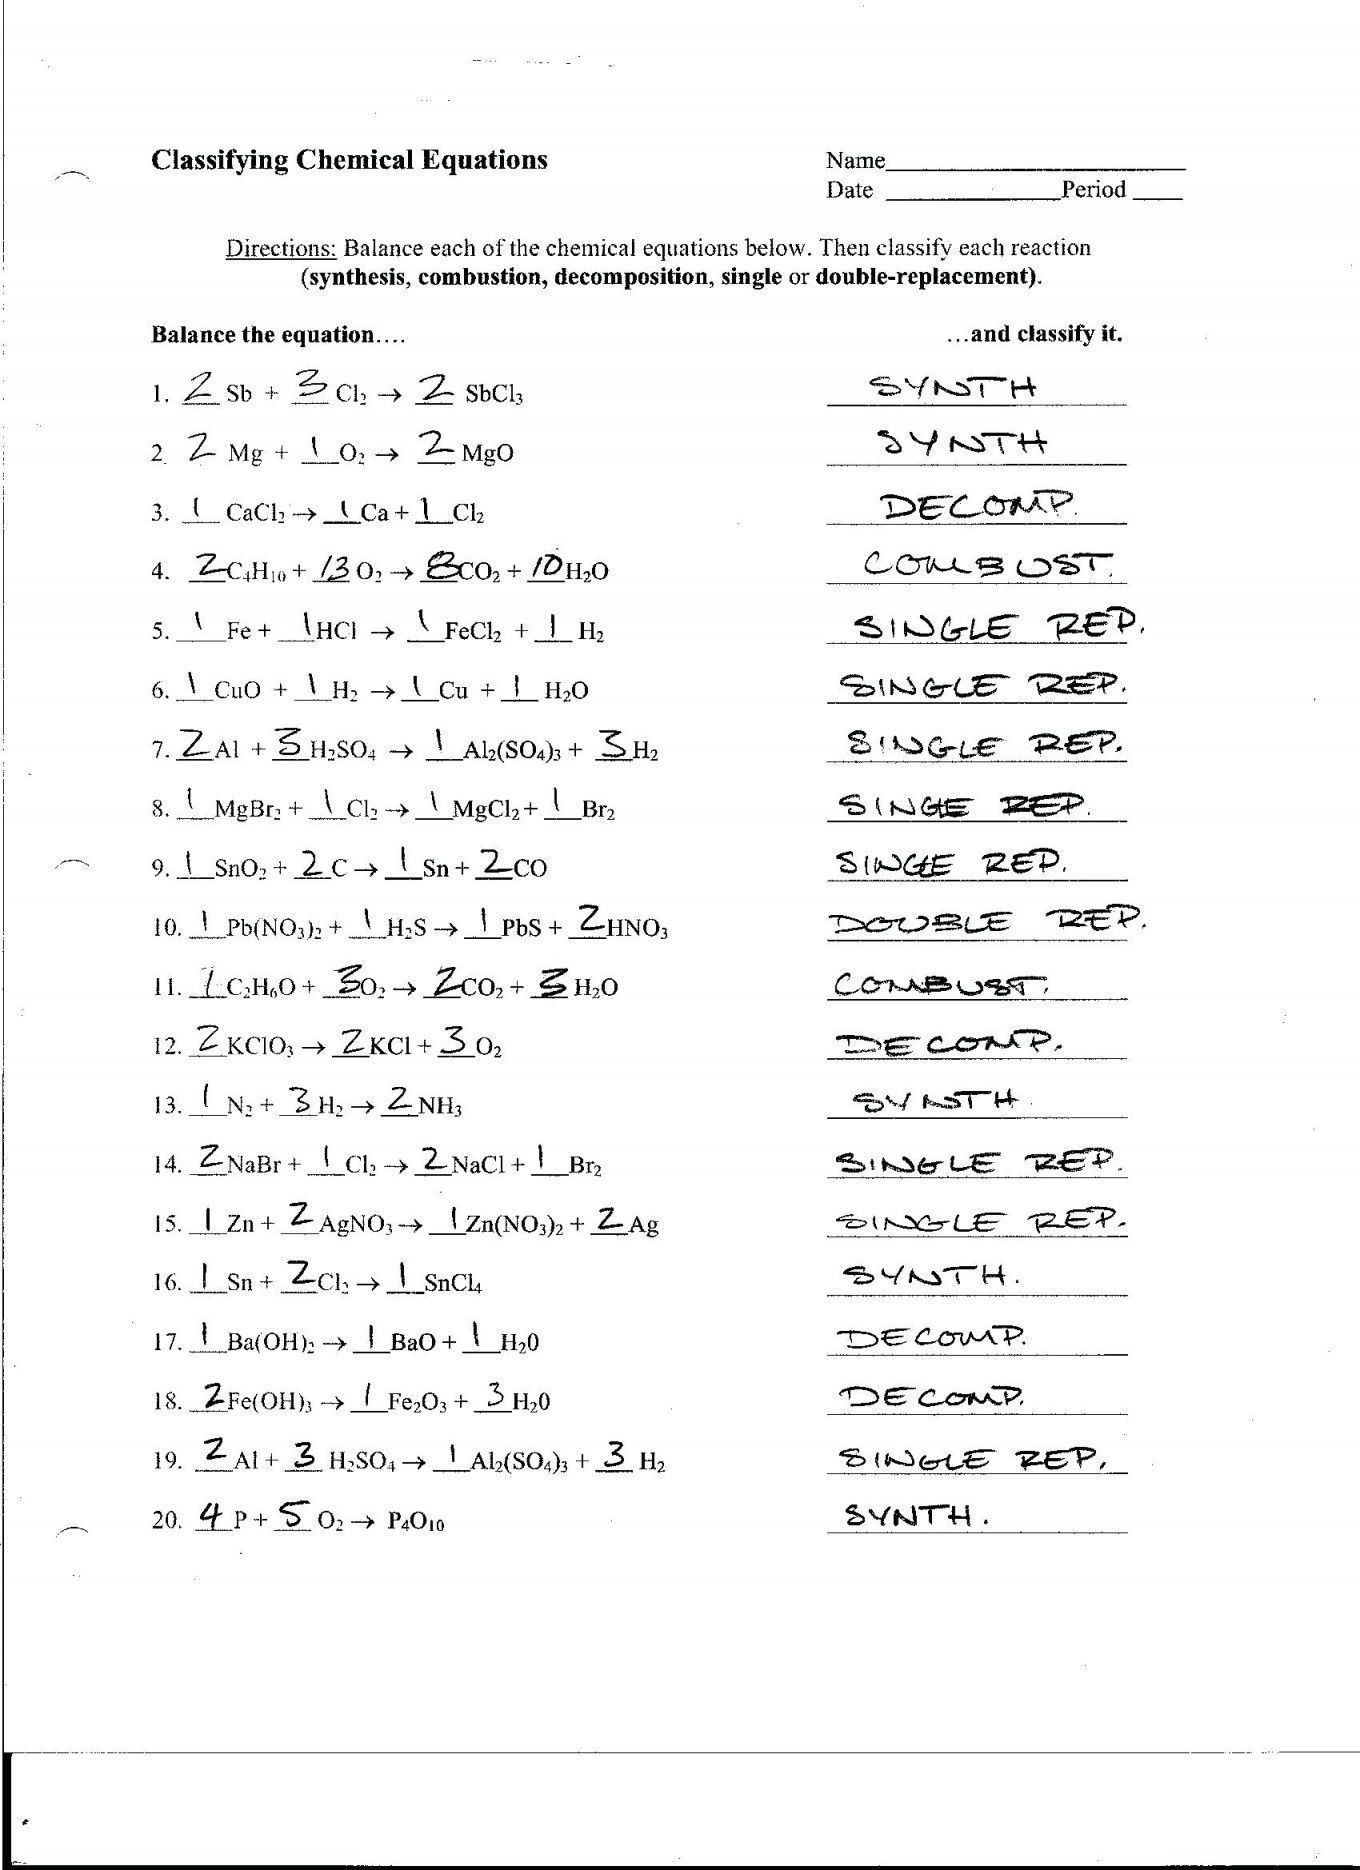  Combustion Reaction Worksheet Free Download Goodimg co